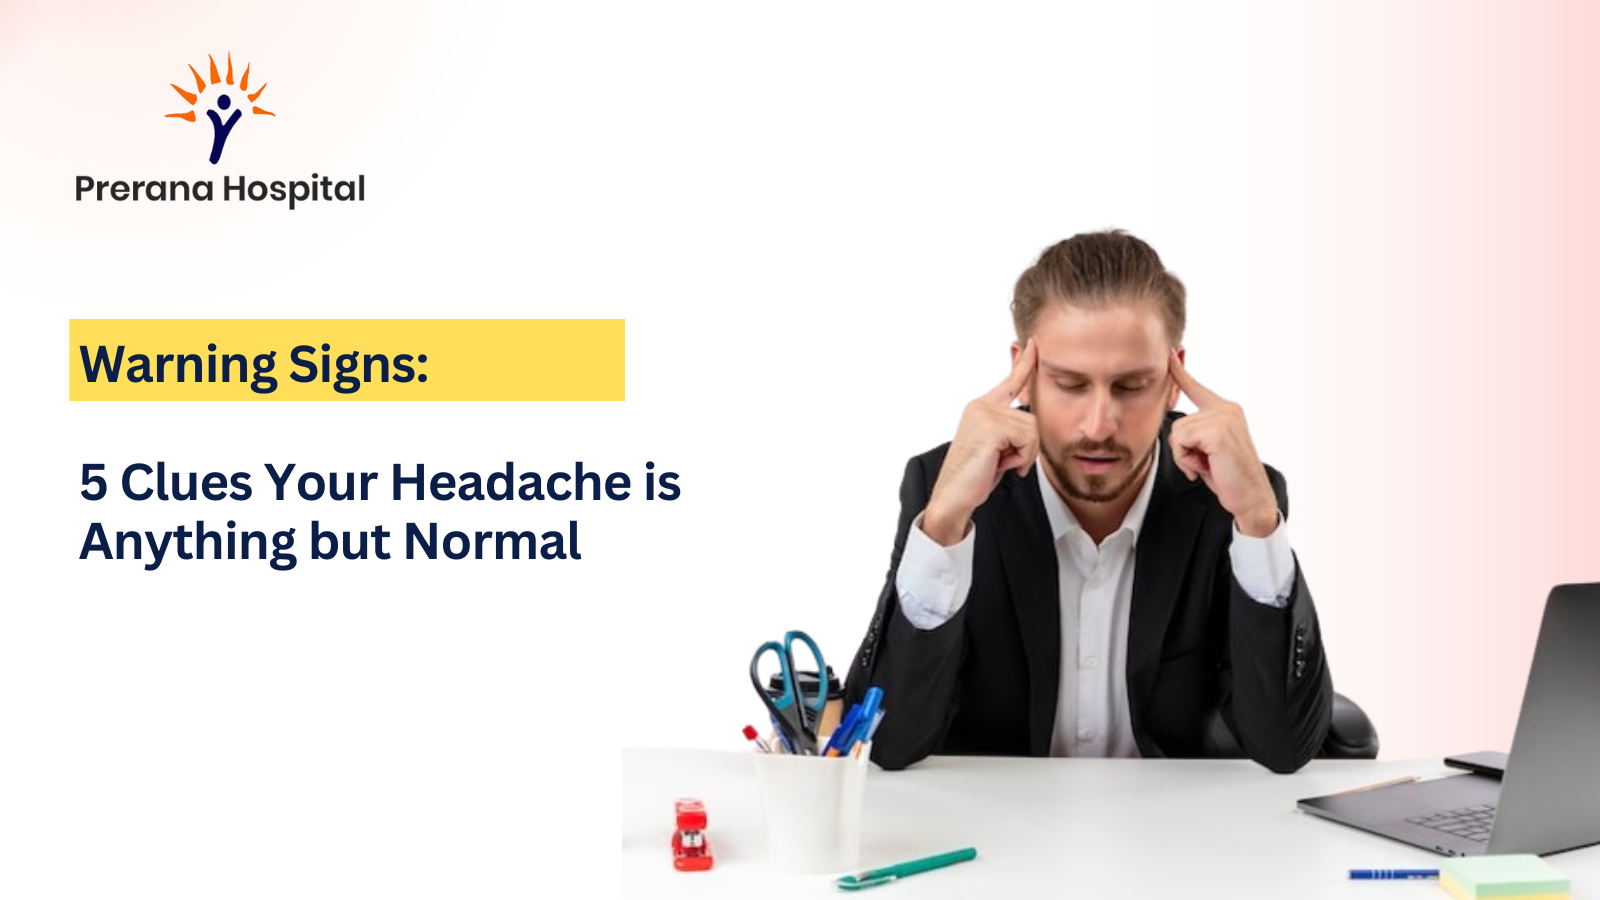 Warning Signs: 5 Clues Your Headache is Anything but Normal